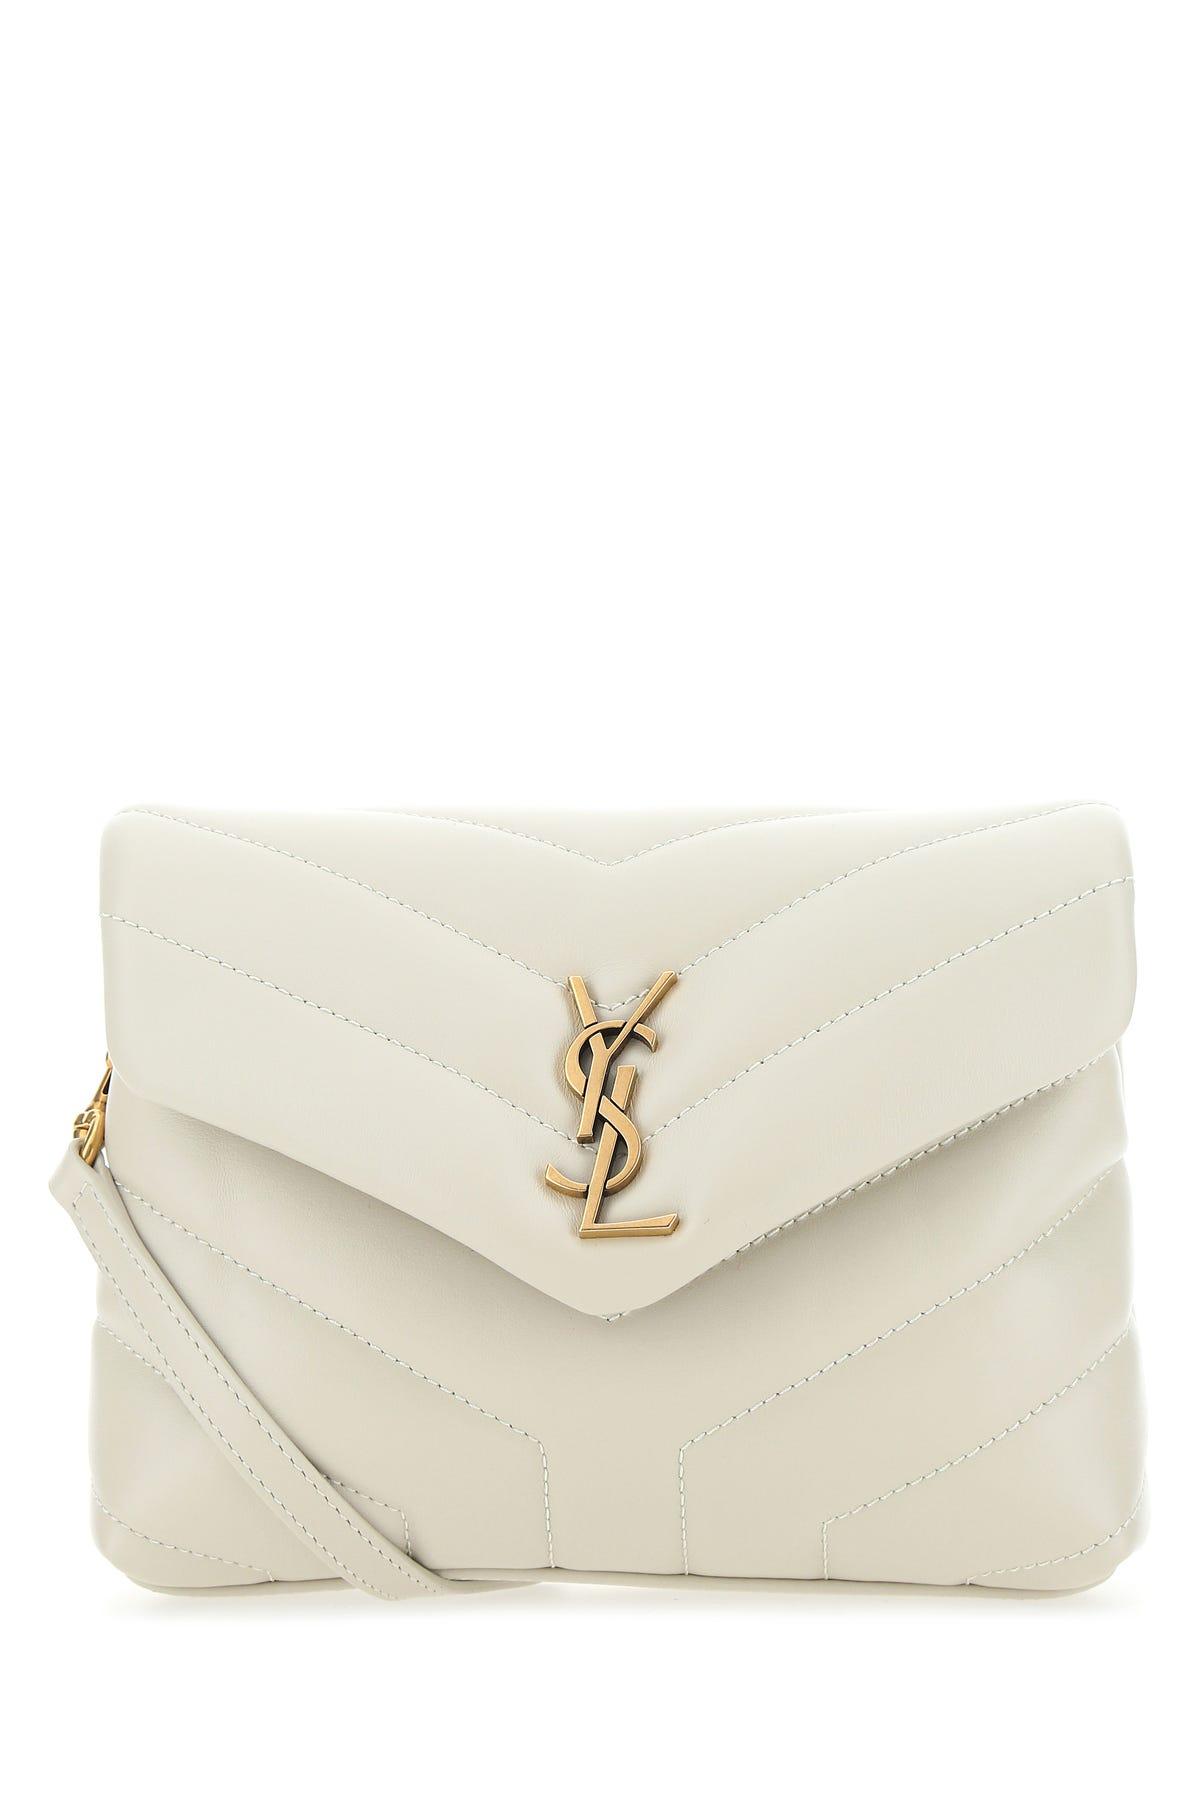 Saint Laurent Chalk Leather Loulou Toy Crossbody Bag in White | Lyst